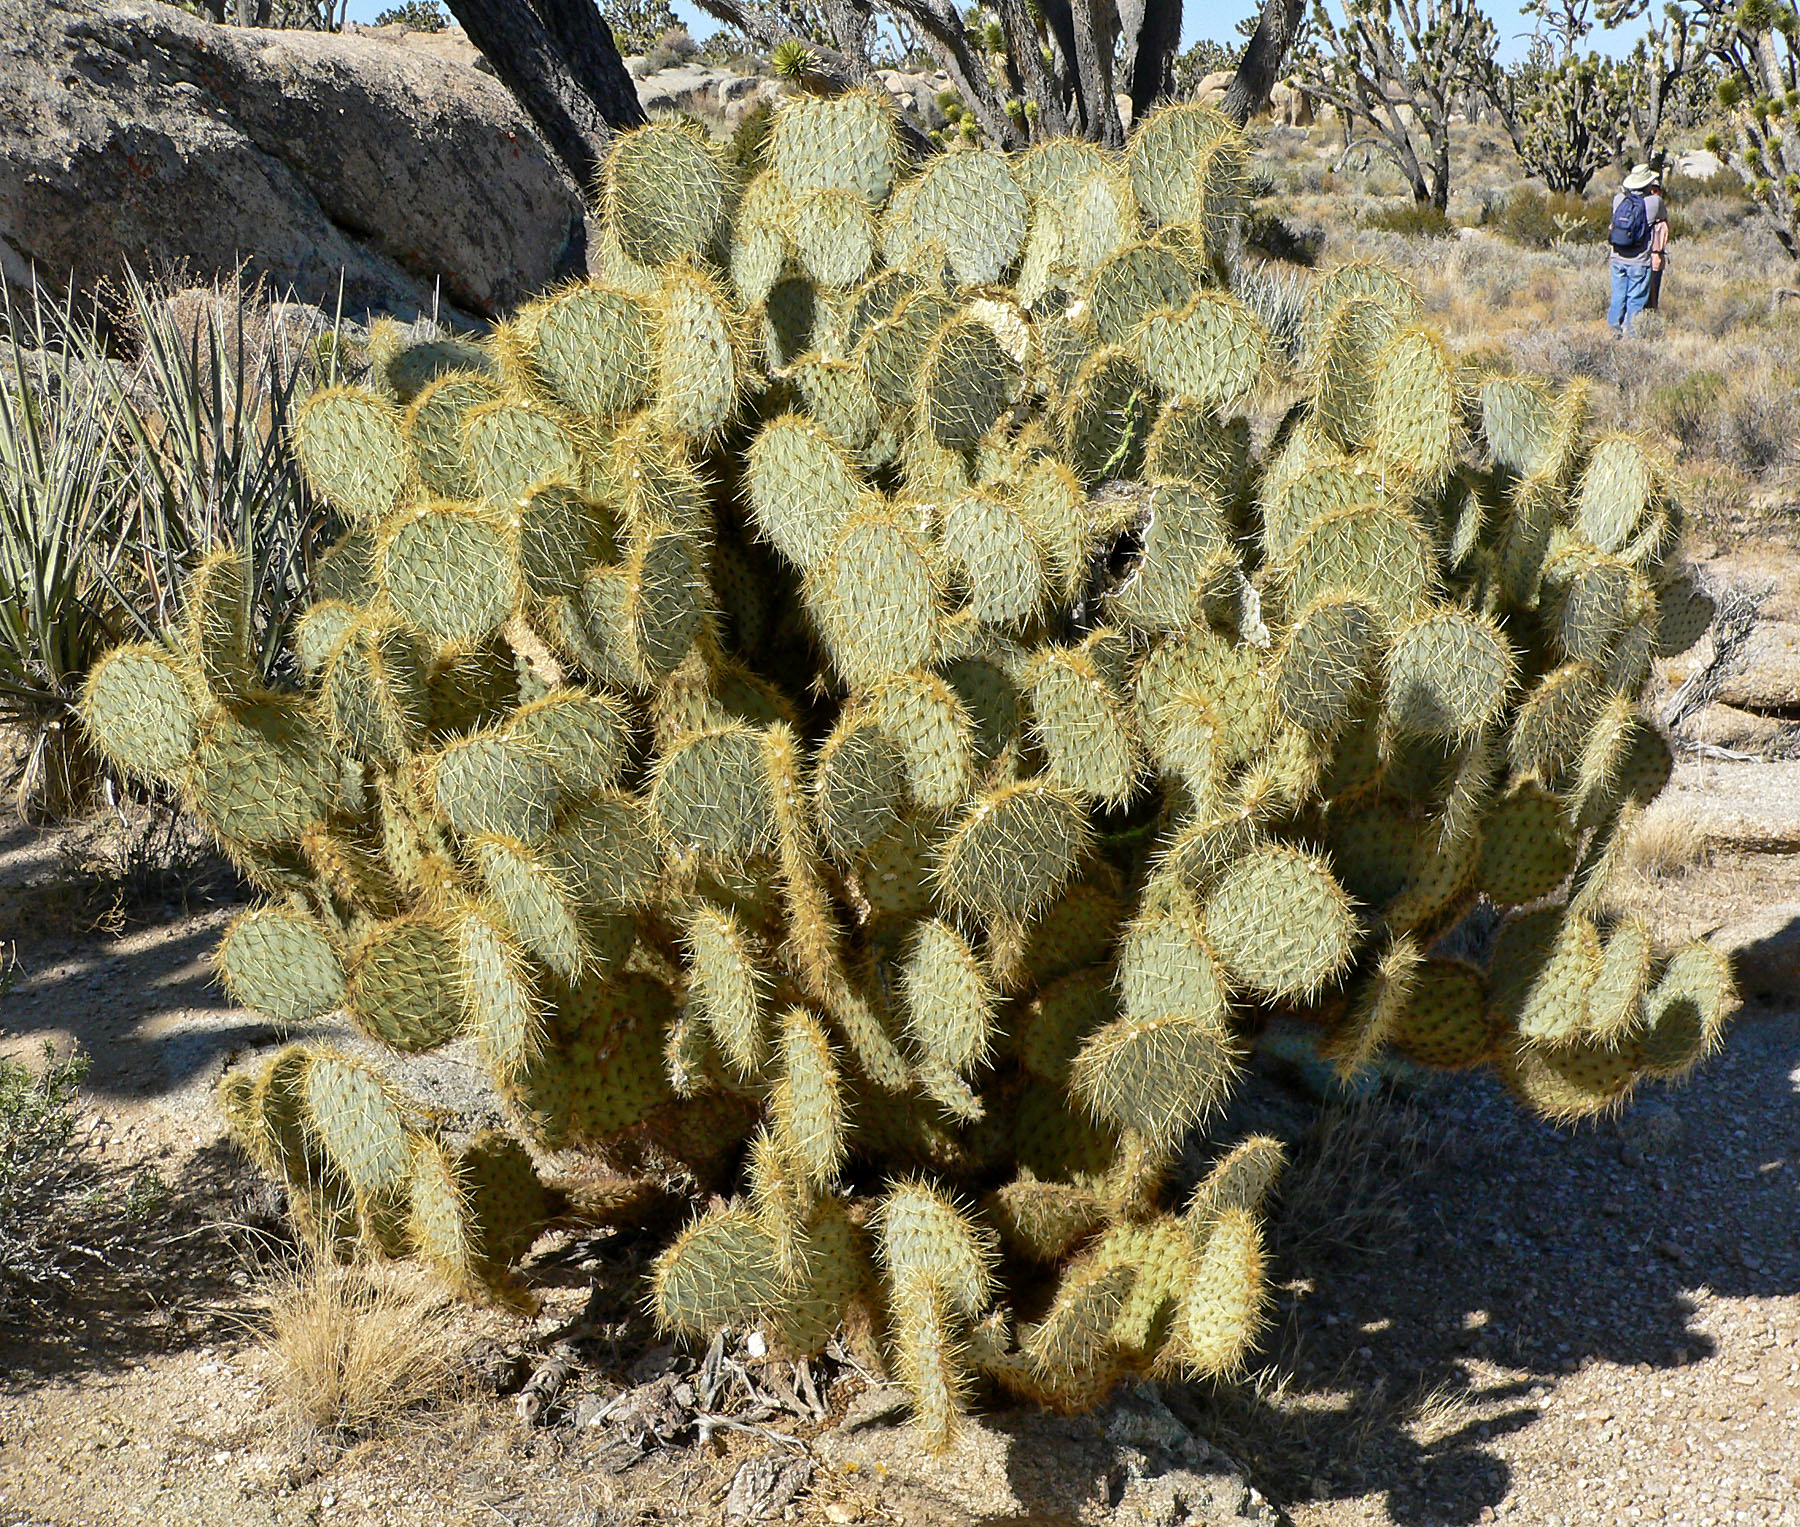 Prickly Pear Cactus courtesy of Wikimedia Commons